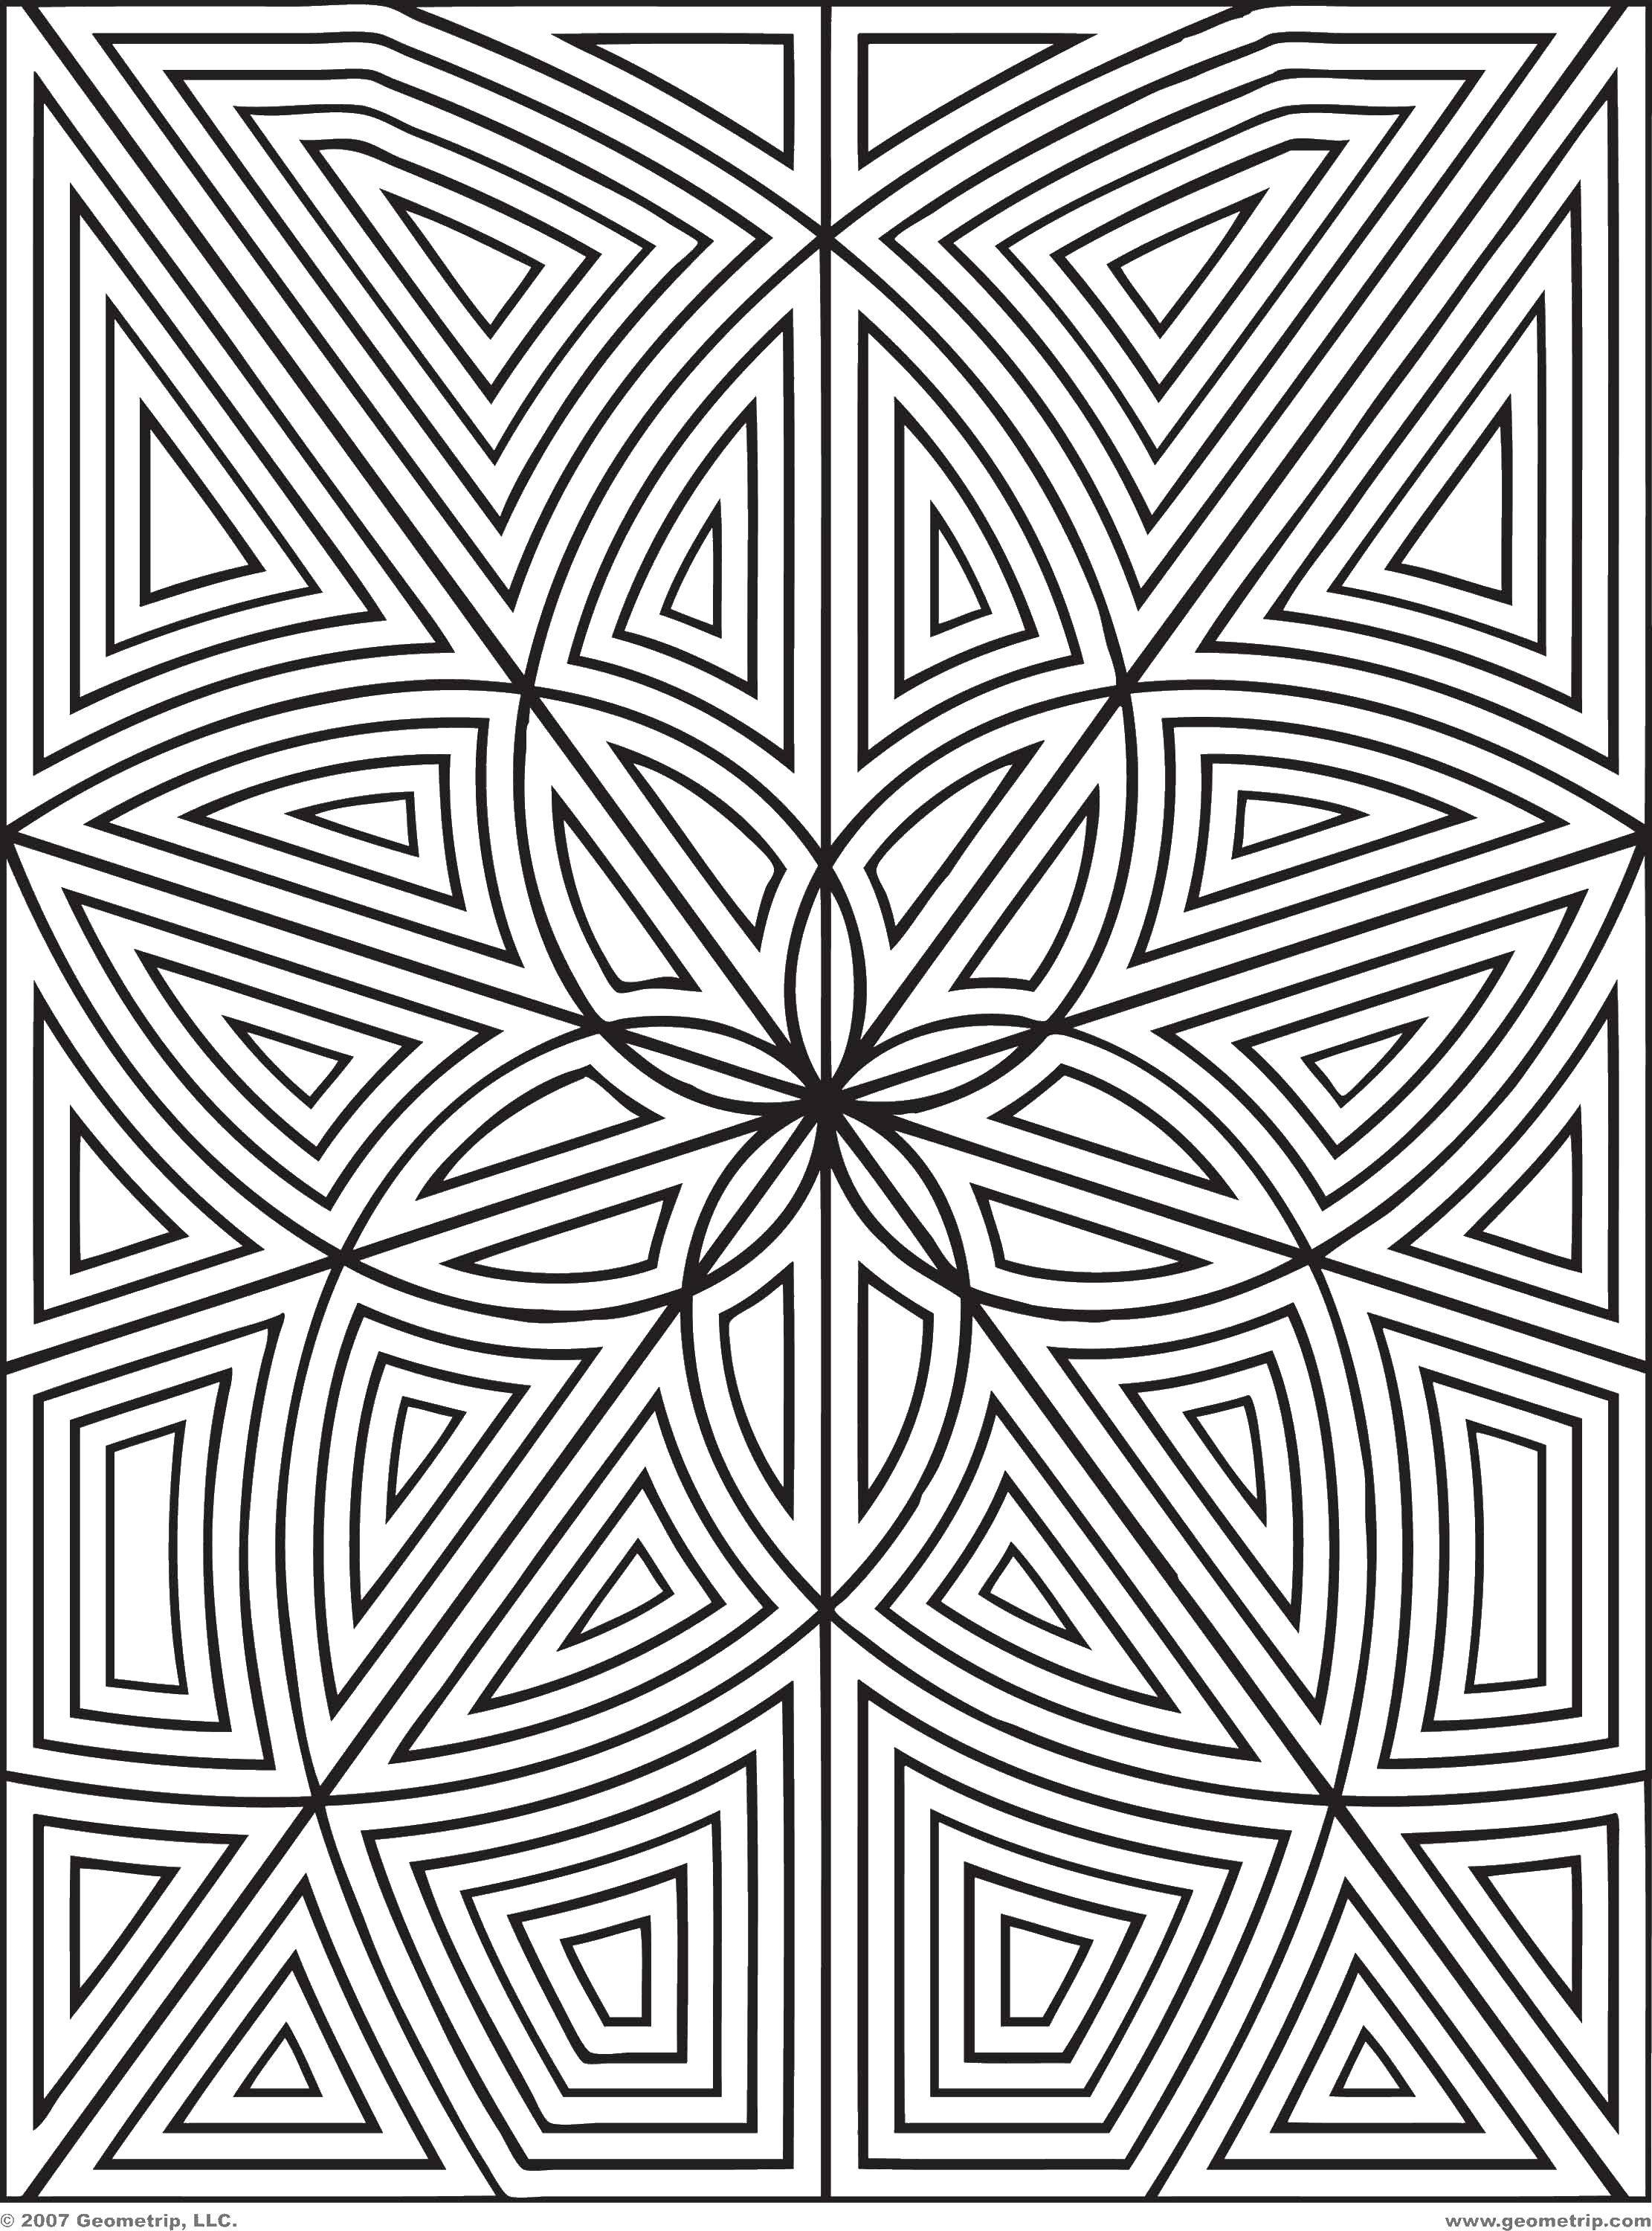 Coloring Flower, shapes, treugolniki. Category Patterns. Tags:  patterns, colors, shapes.